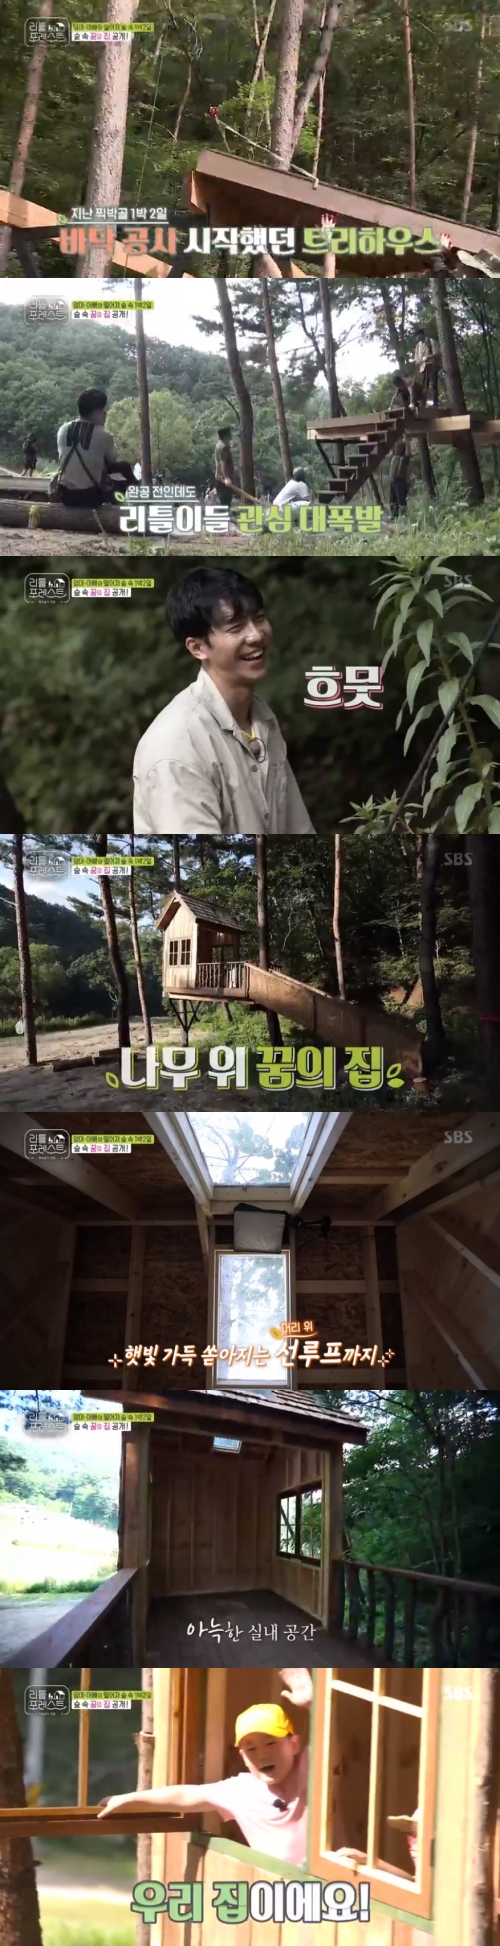 The romance of Little Forest Lee Seung-gi has been realized.On the 26th SBS entertainment program Little Forest, Treehouse was released.The treehouse, which Lee Seung-gi has been preparing for a month, was completed.Lee Seung-gi built a treehouse that would be the foundation for a month by directly using woodworking to build a house on a tree that was a childhood romance.Lee Seung-gi and Lee Seo-jin joined and were shown putting treehouse on the tree.Lee Seung-gi whispered to Eugene and Lee Hyun-yi, I built a cabin in the forest.Lee Seung-gi and the carers then took the Littles to the Treehouse.Little ran out of treehouse and was proud of Lee Seung-gi because he could not stop admiring the treehouse.